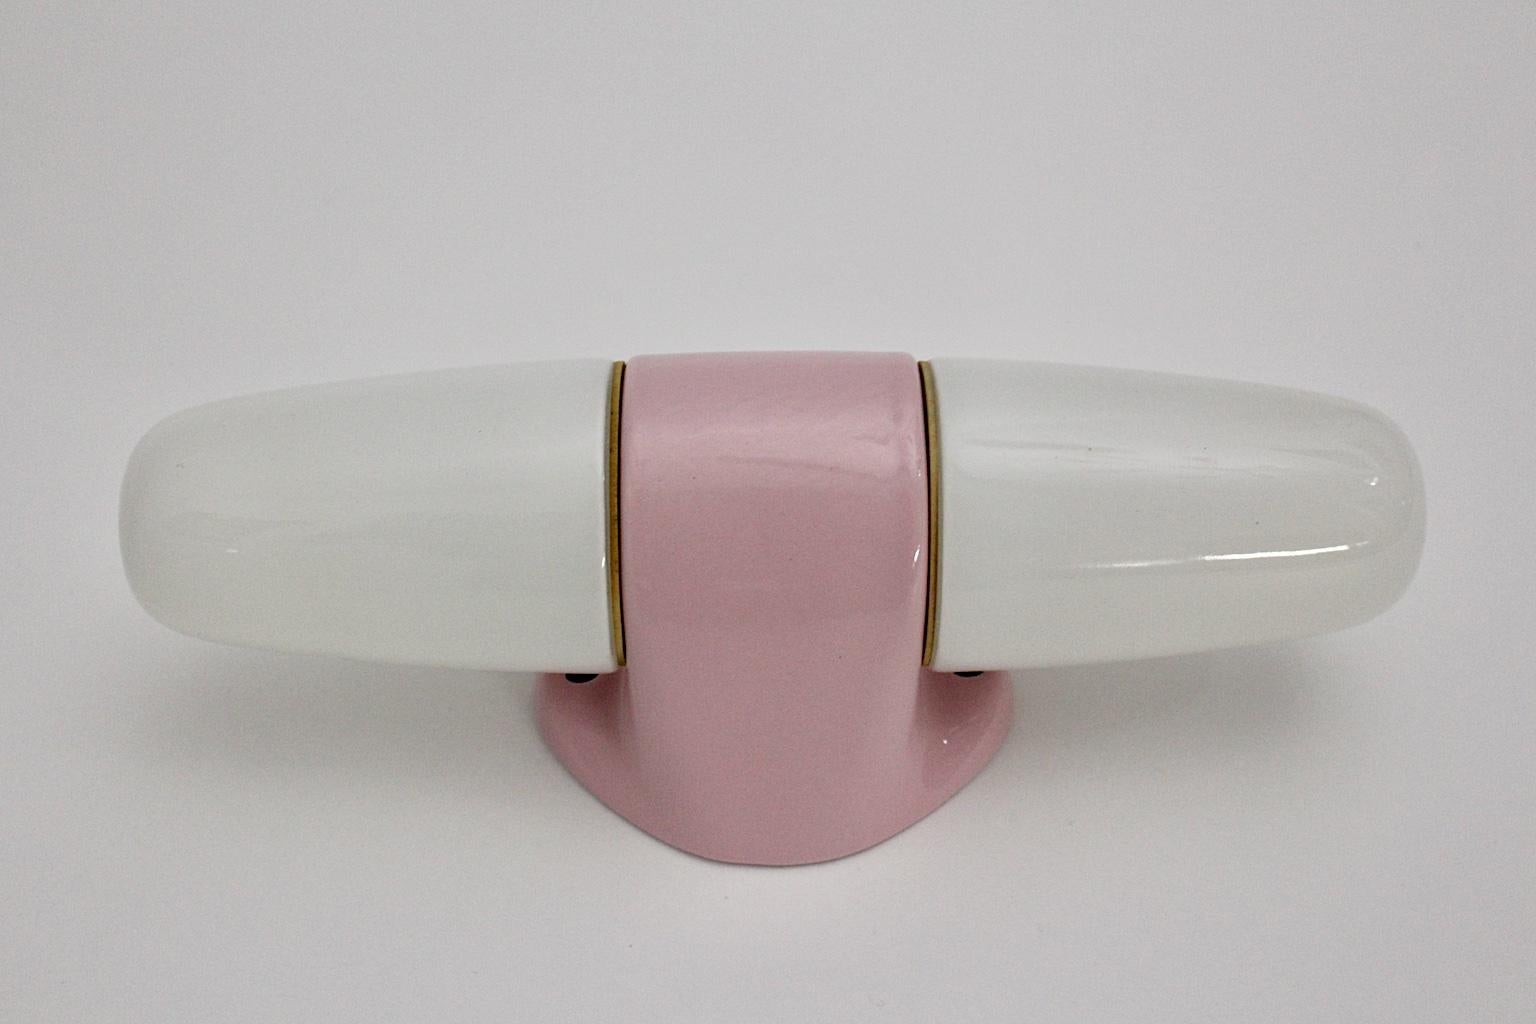 A Wilhelm Wagenfeld Mid-Century Modern vintage pink ceramic glass sconce or wall light, which was designed by Wilhelm Wagenfeld and produced by Linder, Germany, circa 1950s.
The lighting shows pastel tones in pink and white, while the base was made